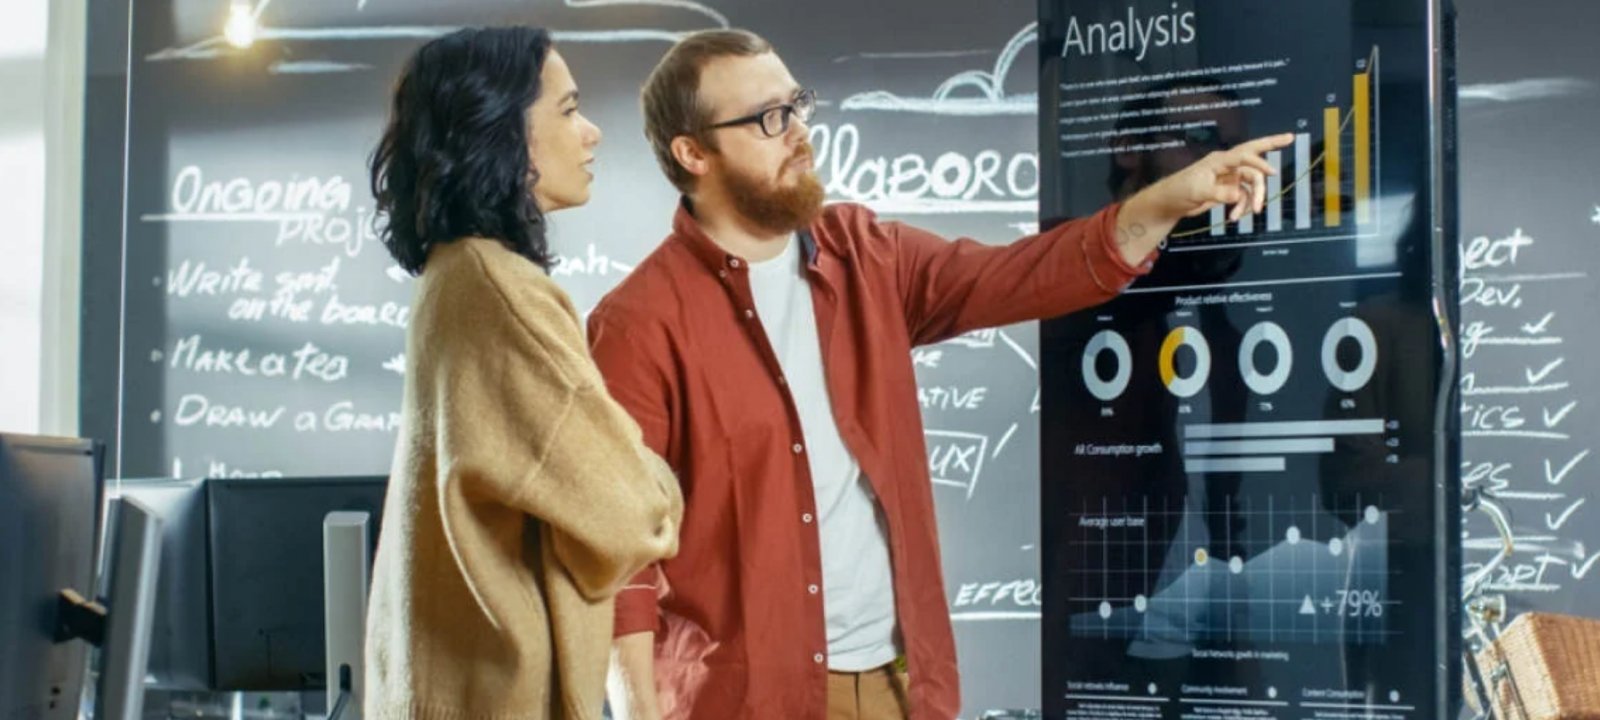 Two professionals analyze data while standing in front of a large monitor.